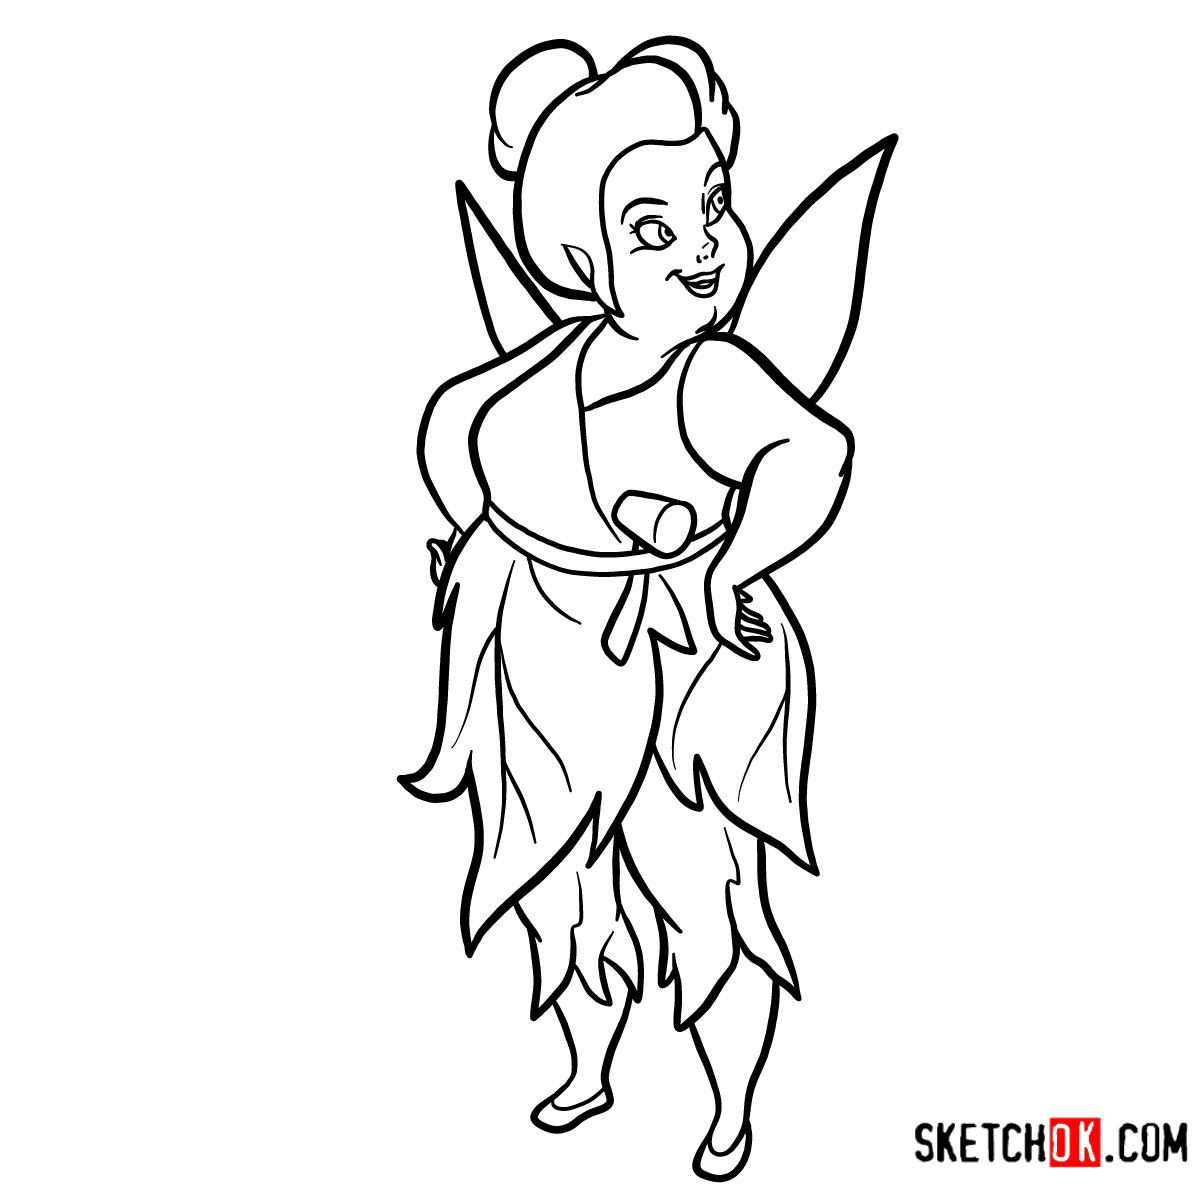 How to Draw Fairy Mary from Disney's Realm: Pixie Pencil Power